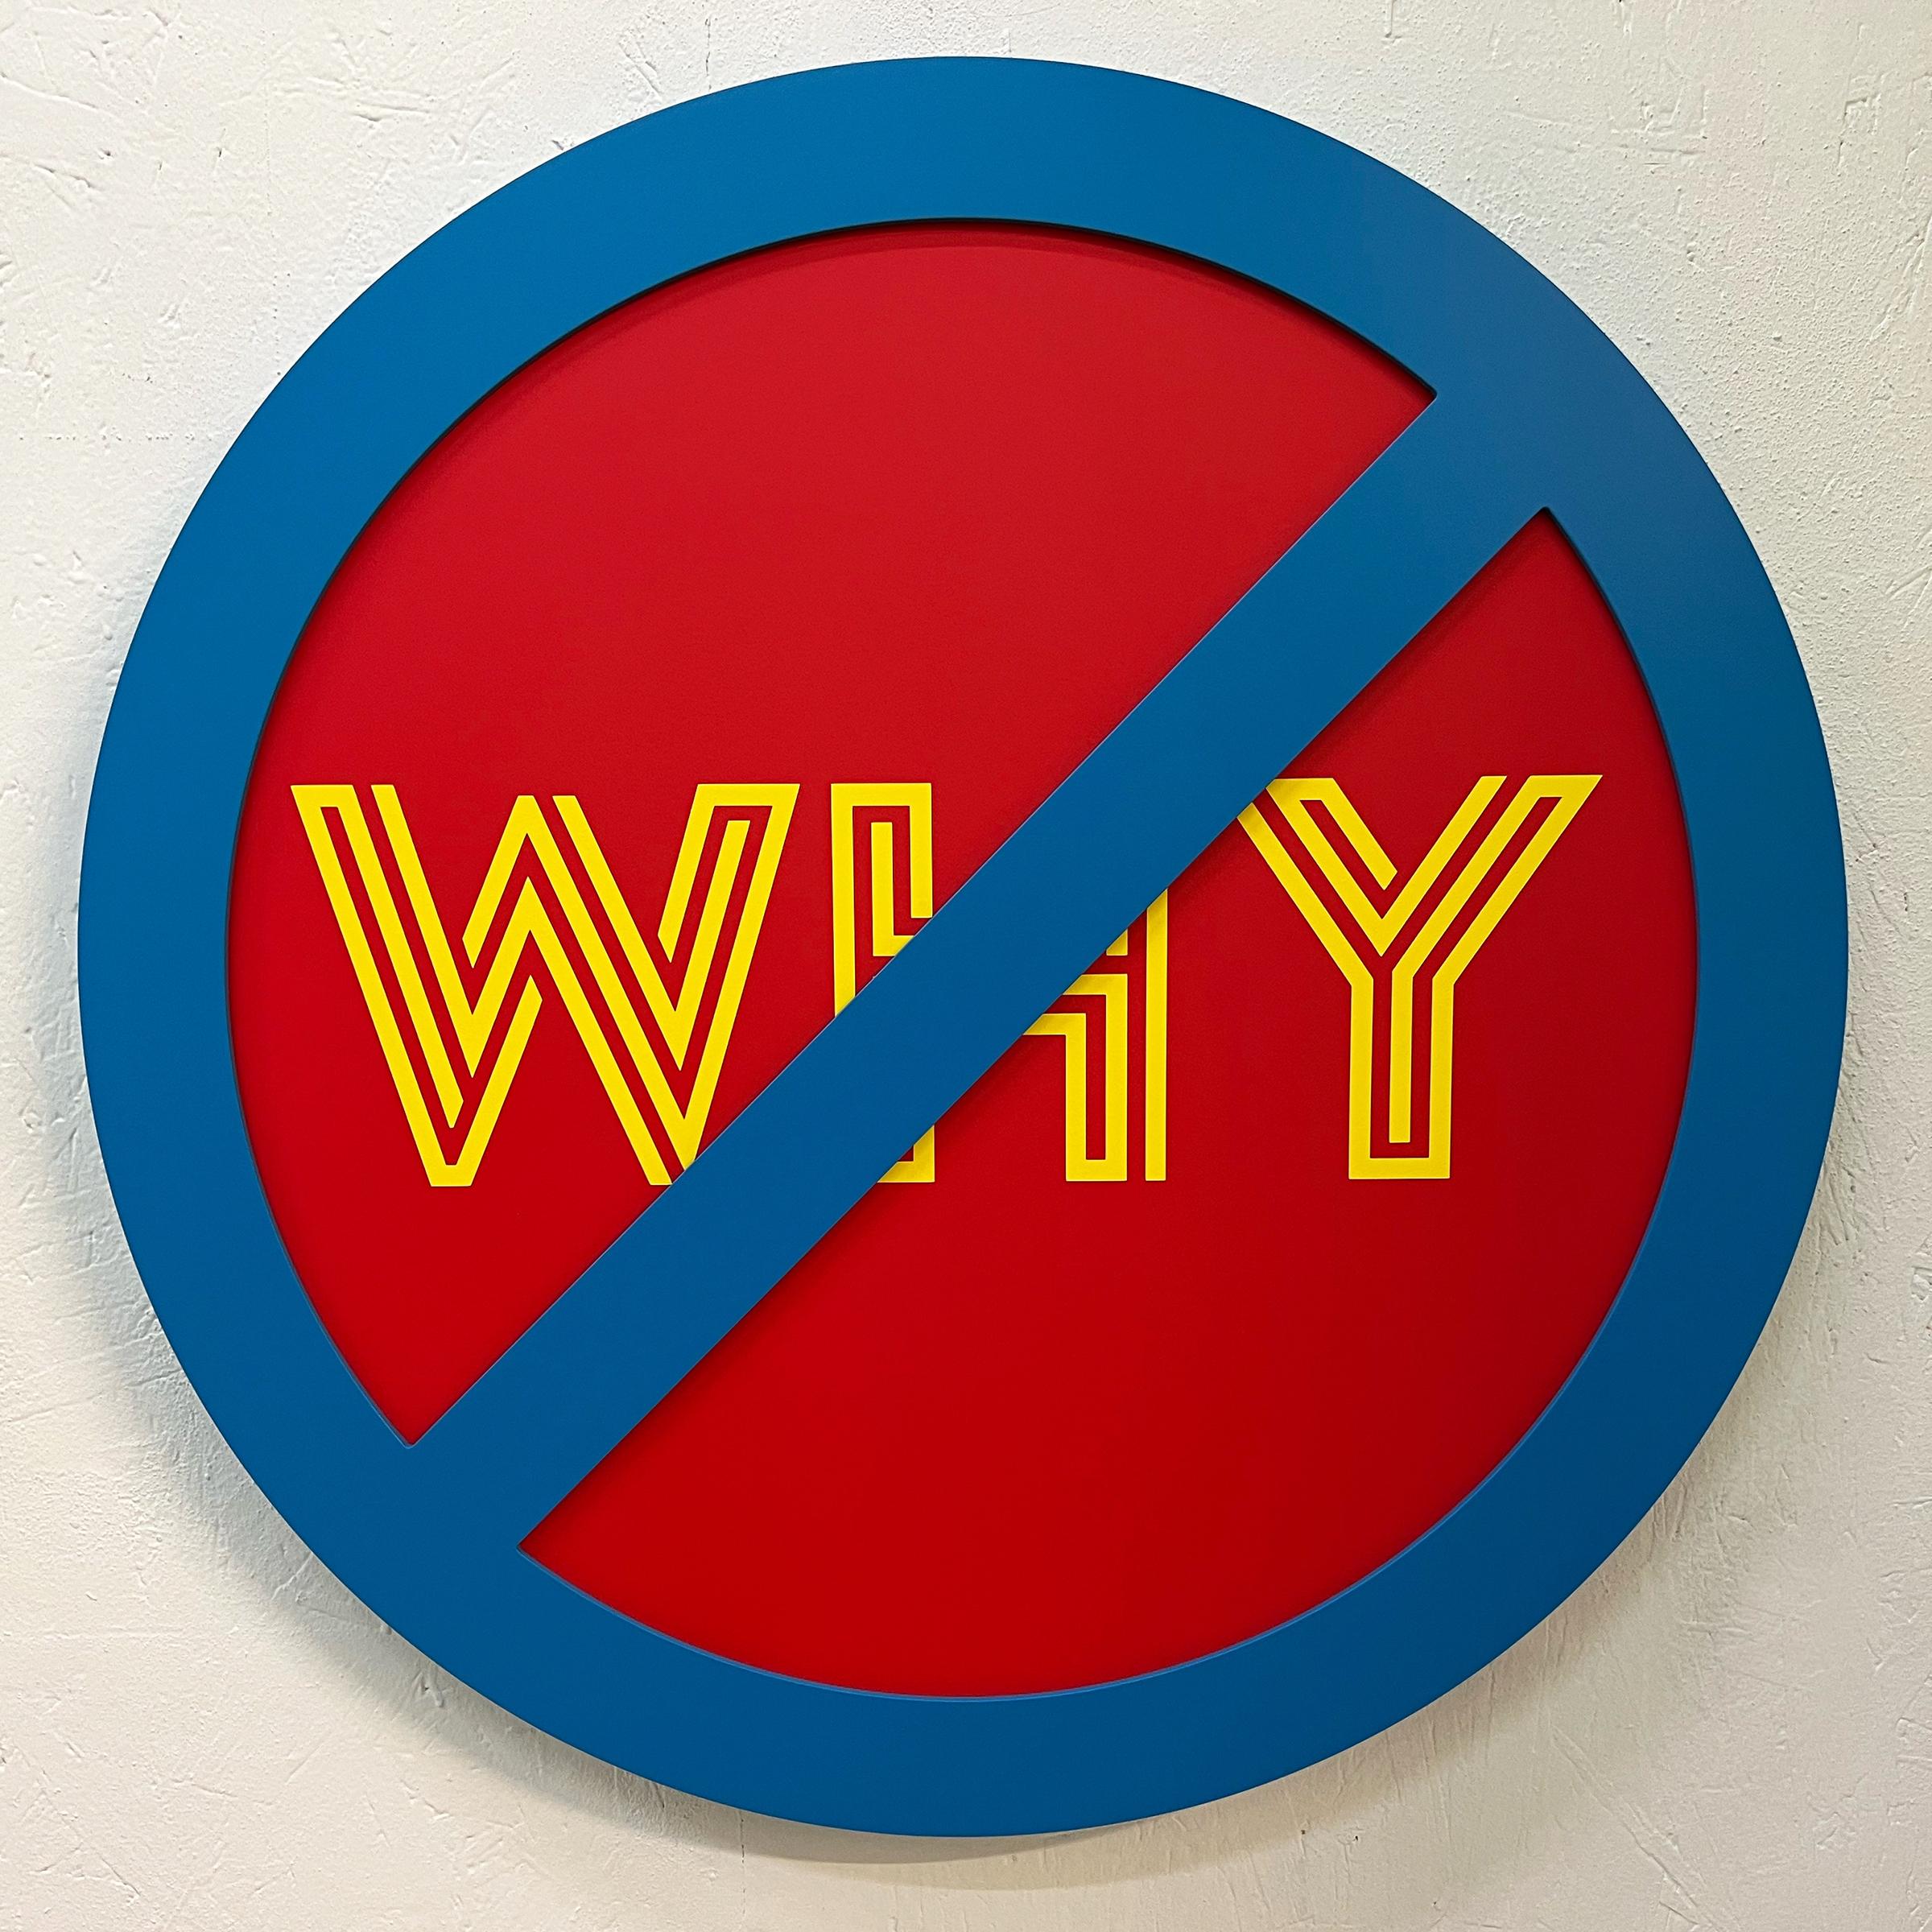 Portrait Painting Michael Porten - « No Why (Yellow on Red) » - art conceptuel, pop contemporain - Lawrence Weiner